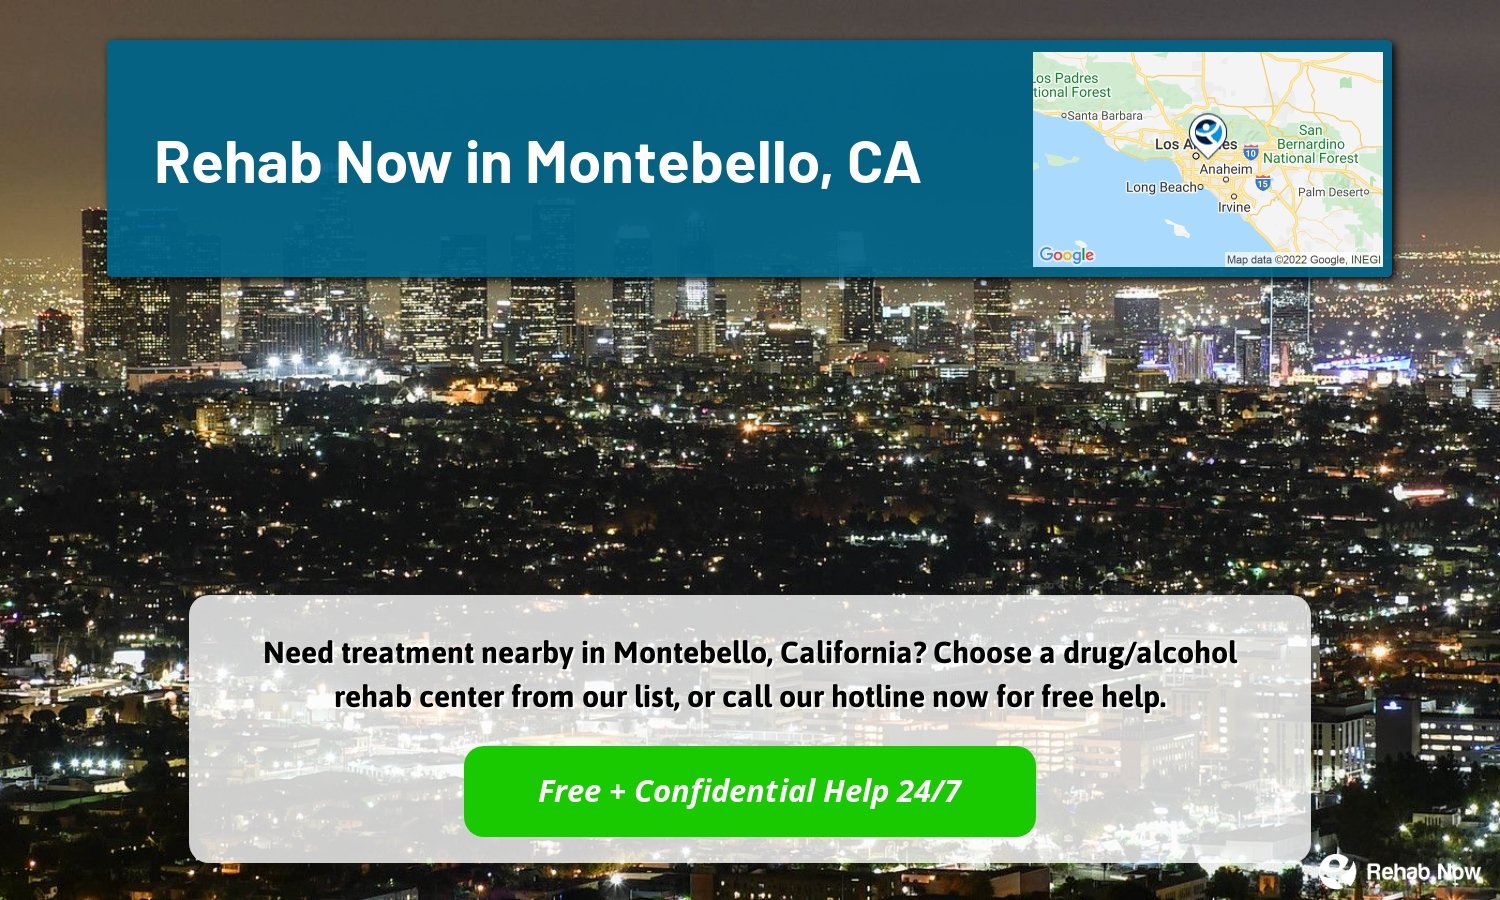 Need treatment nearby in Montebello, California? Choose a drug/alcohol rehab center from our list, or call our hotline now for free help.